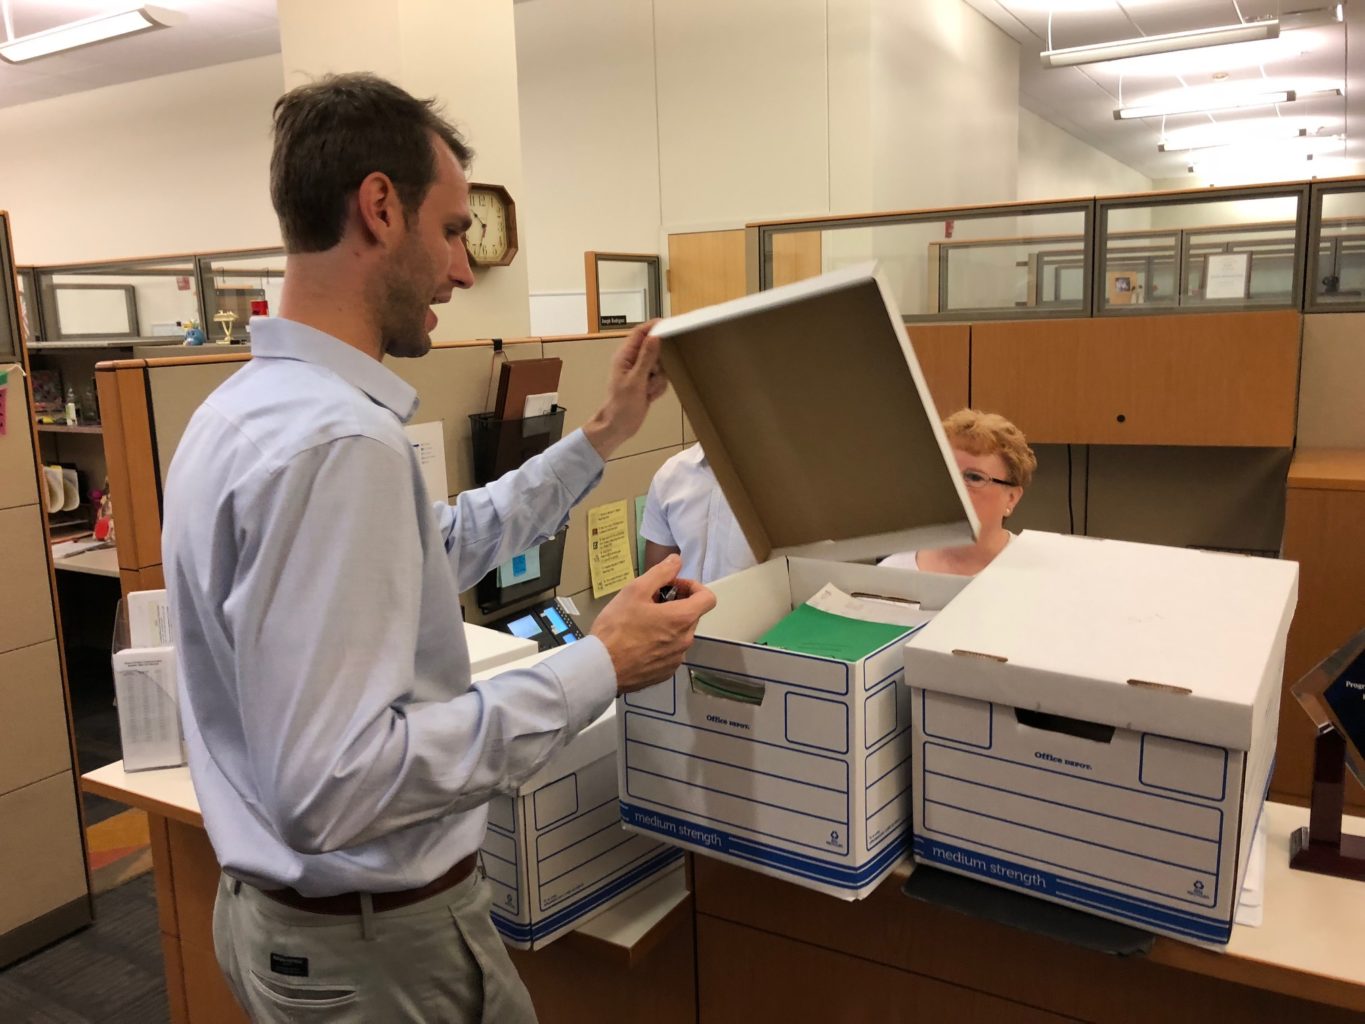 Michael Searle files petitions with City Clerk Jannette Goodall